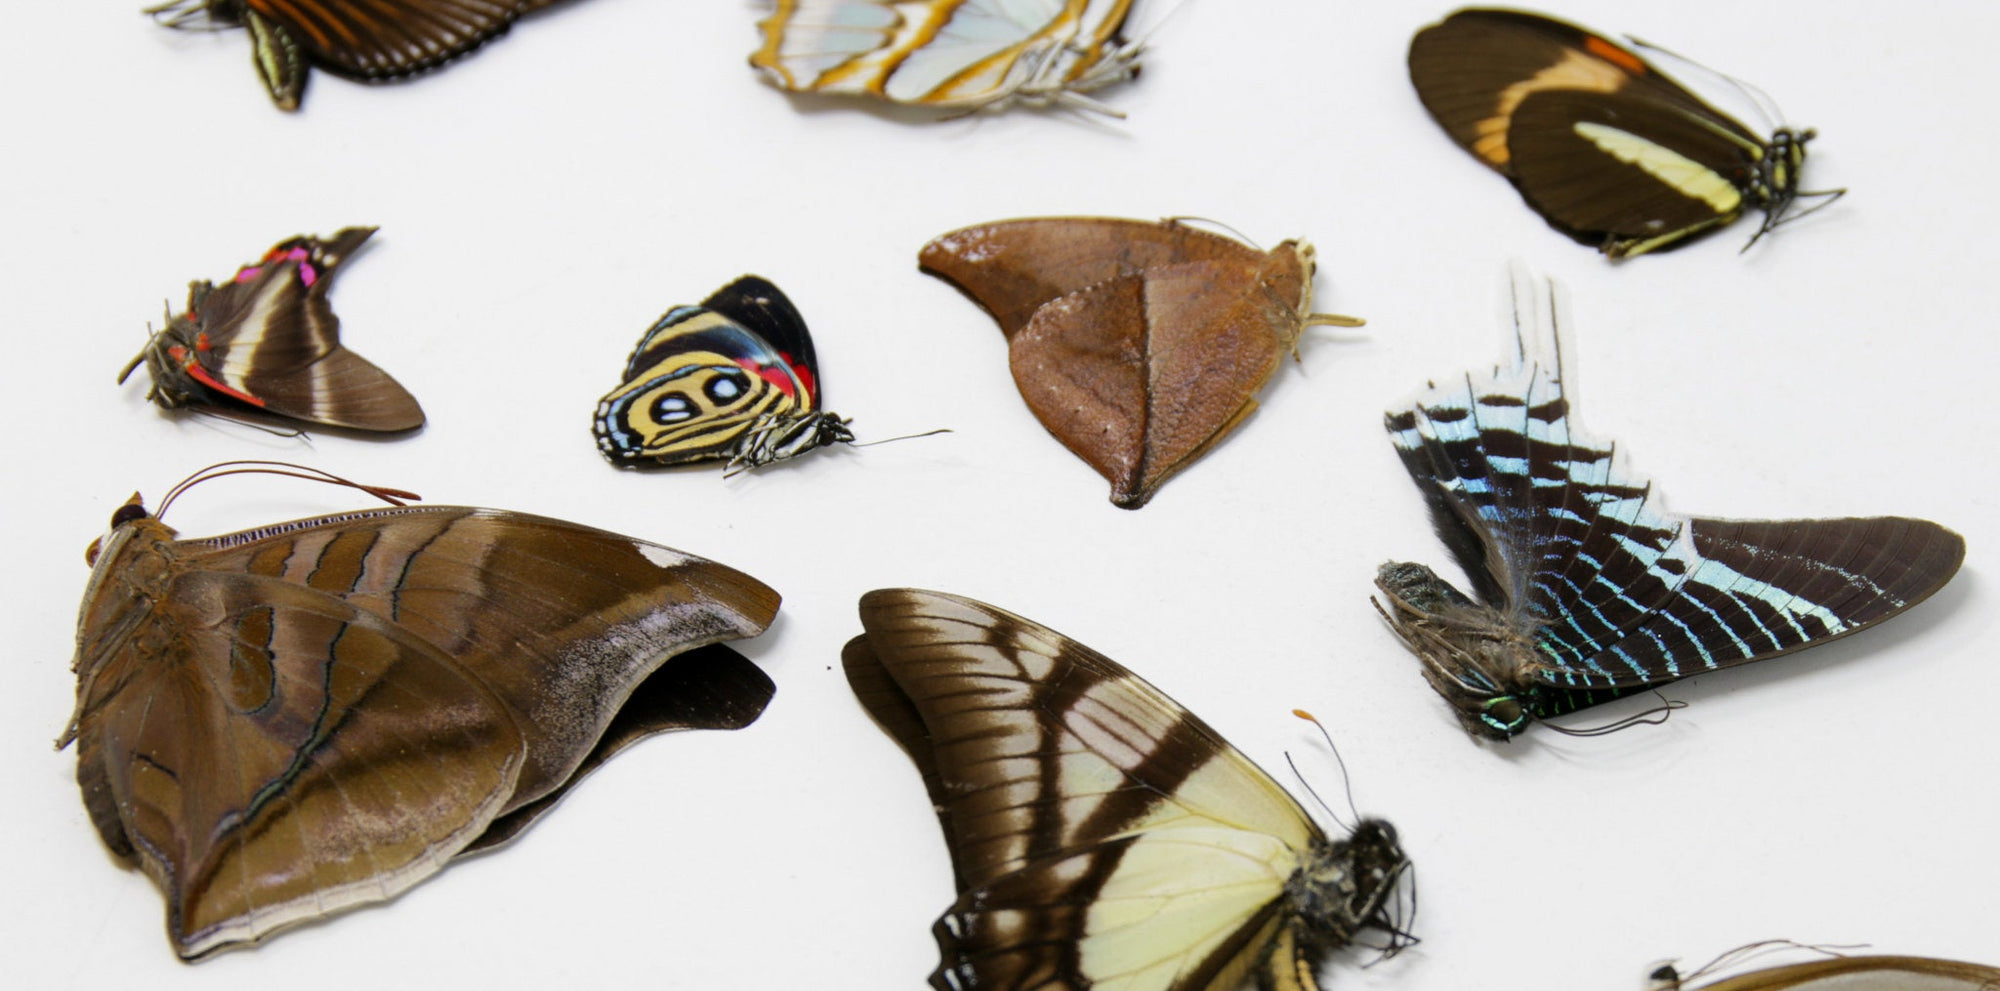 10 Real Butterflies from PERU for Entomology Taxidermy Art